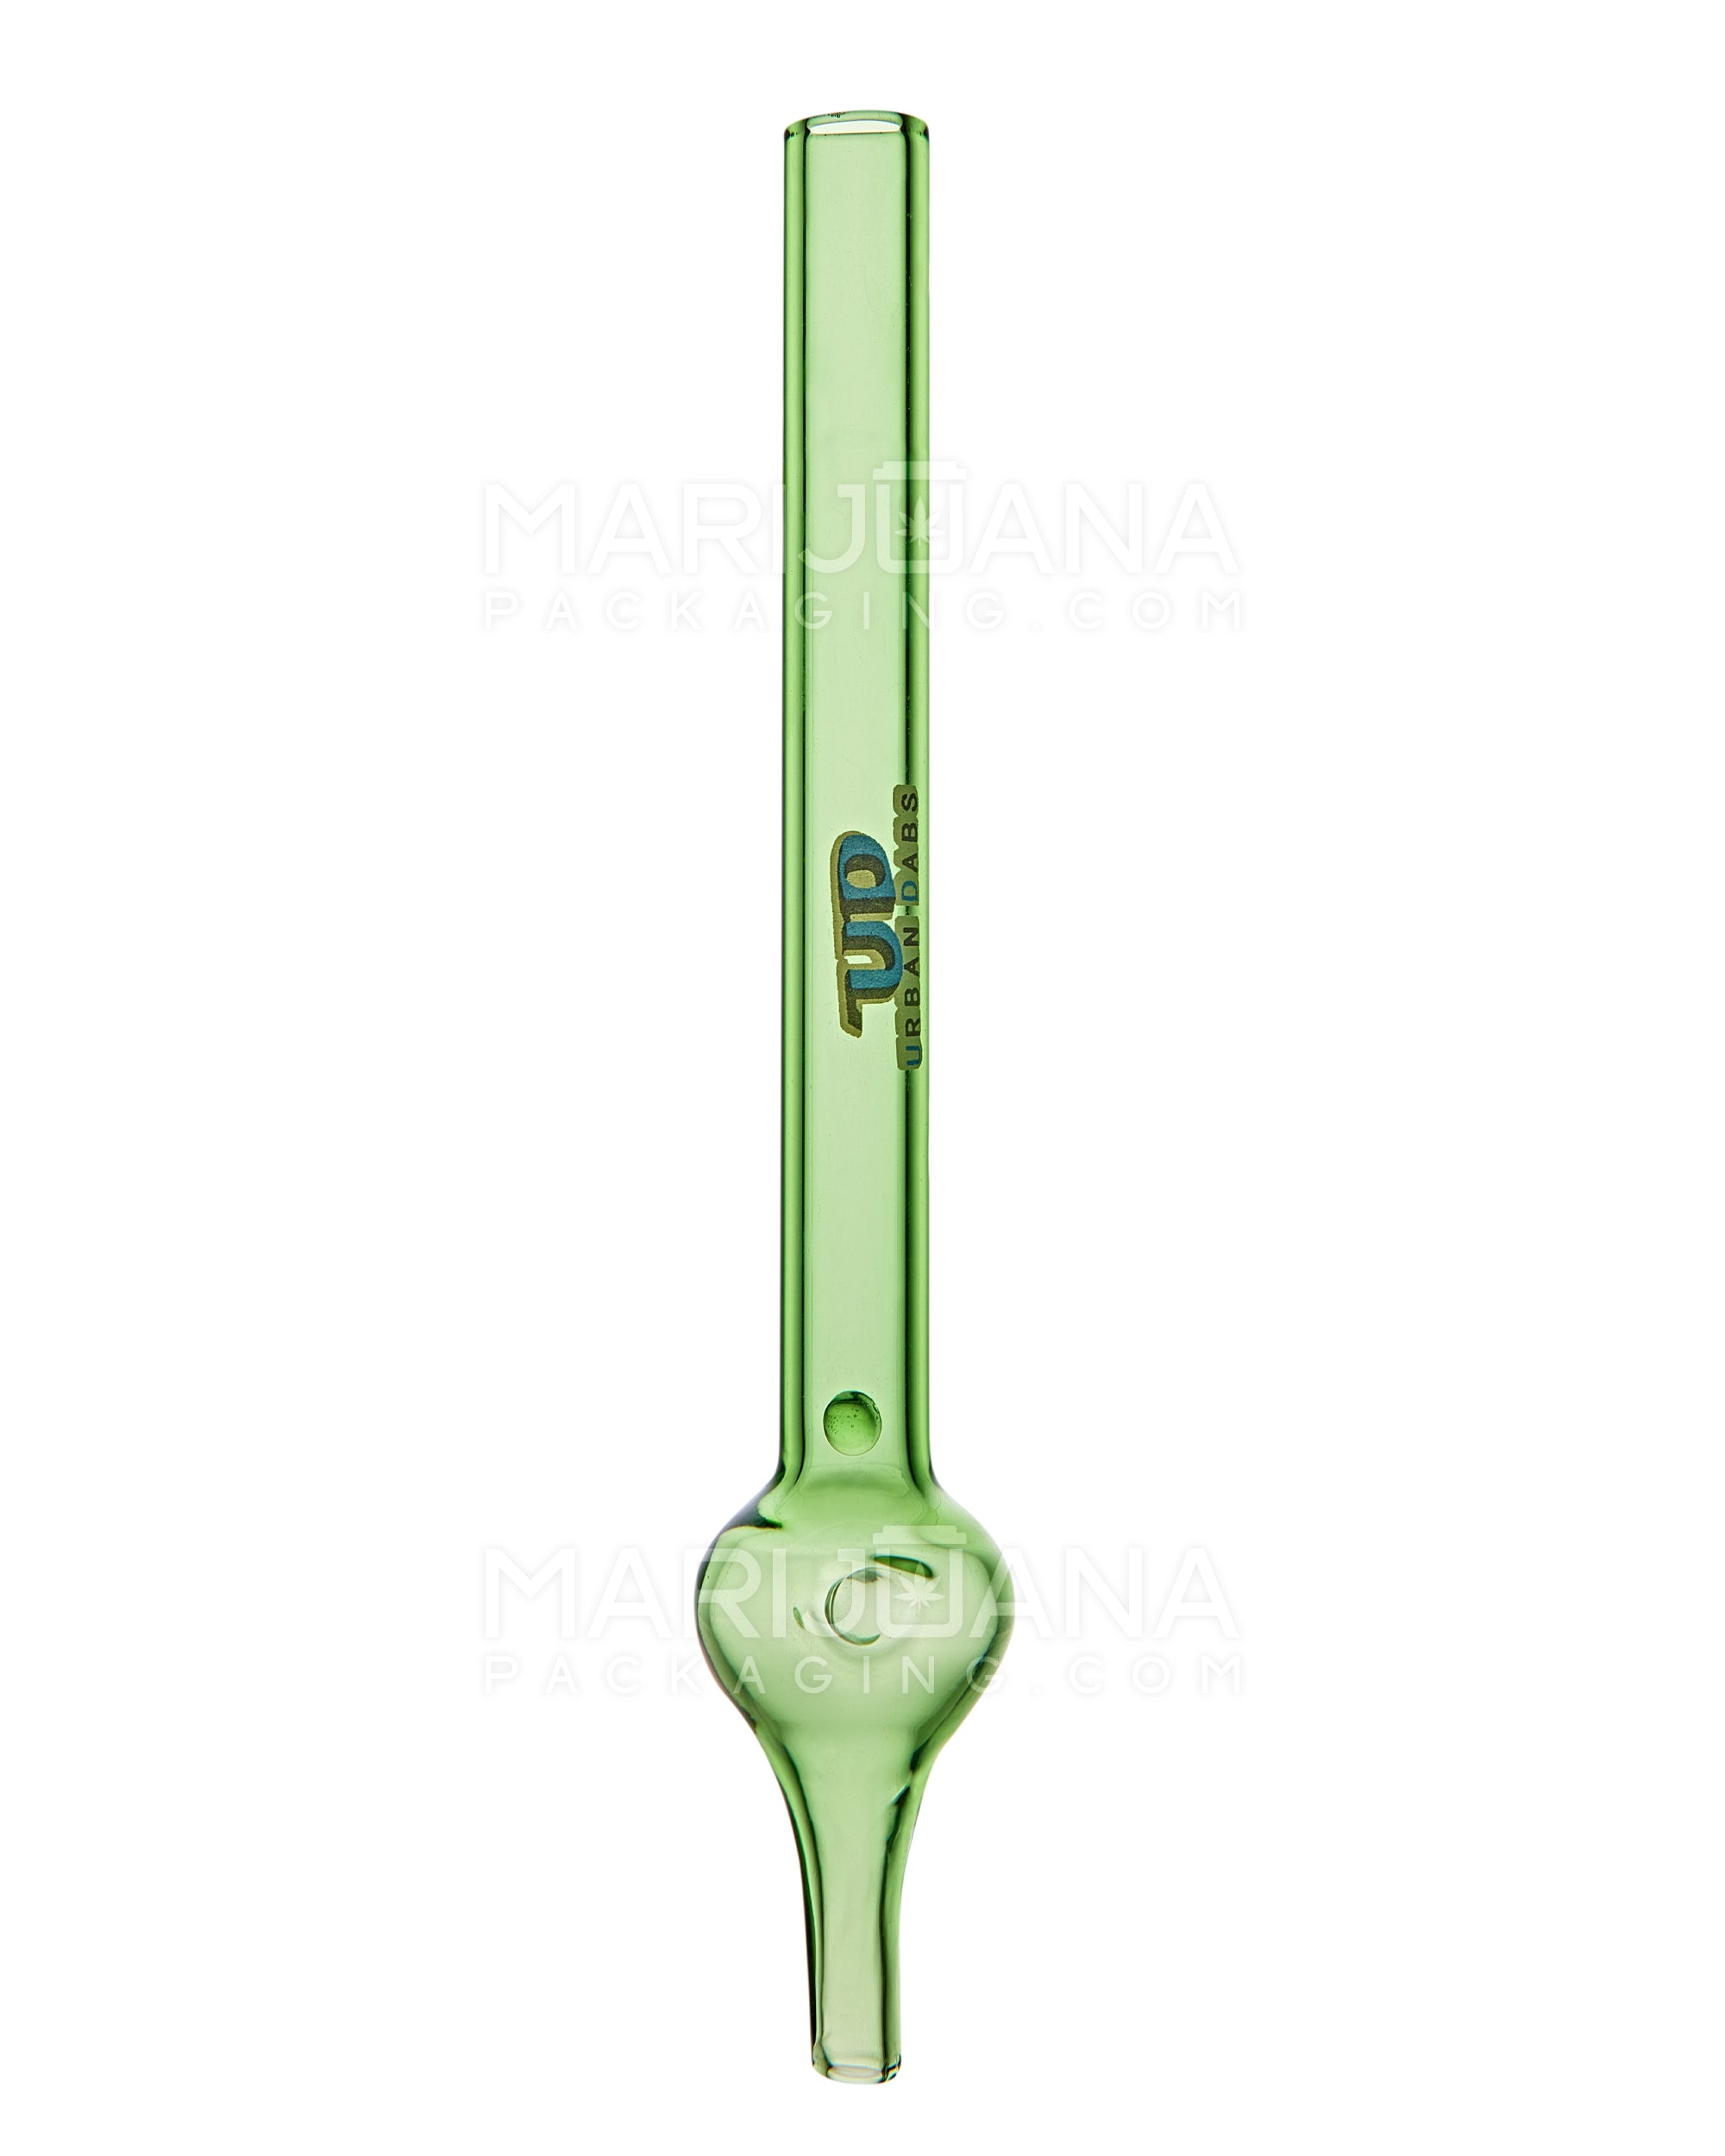 URBAN DABS | Dab Tube for Concentrates | 6in Long - Glass - Assorted - 4